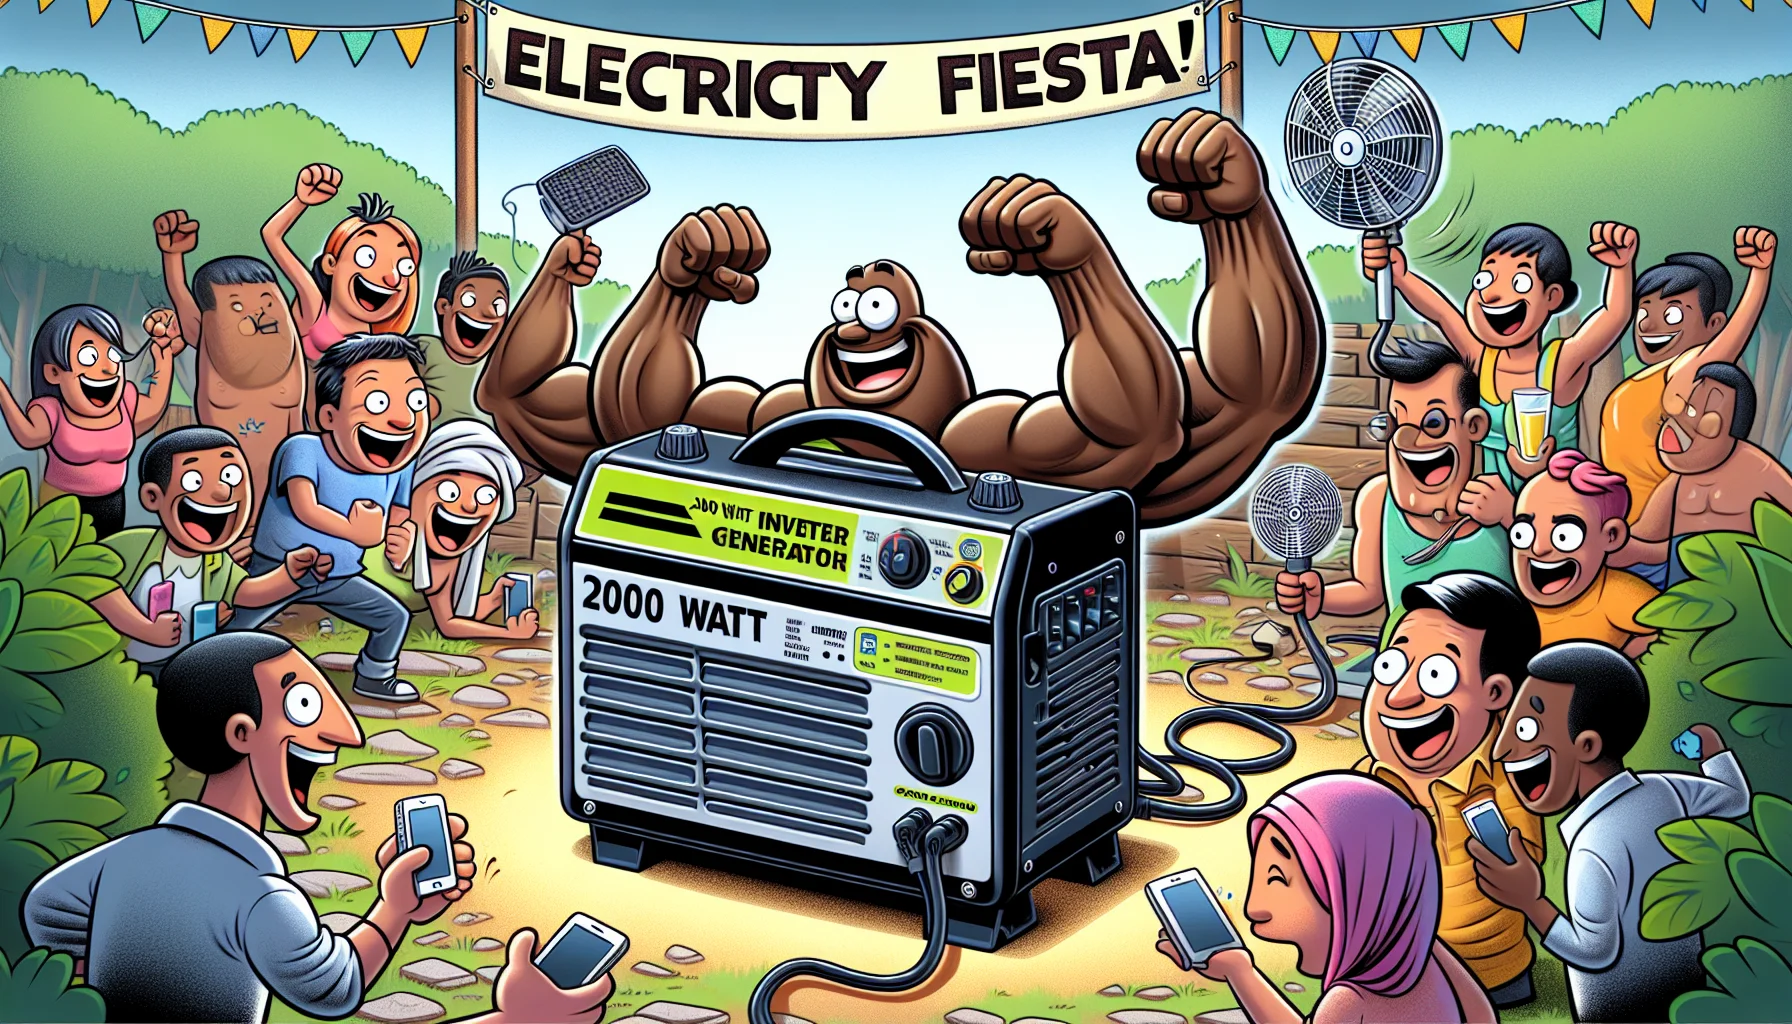 Create a humorous scene featuring a 2000 watt inverter generator brandished like a champion, set up in an outdoor environment. Surround it are cartoonish characters from different descents, such as a Caucasian woman, an African man, a Middle-Eastern person and a Hispanic individual, all in awe and amazement. They are all laughing and having fun, engaged in silly antics, holding out their electronics to power like cell phones, laptops, and fans. The generator should be depicted with humorous characteristics such as animated grinning face and muscular arms. Include a banner above, saying 'Electricity Fiesta' providing a sense of excitement and drawing people into the scene.